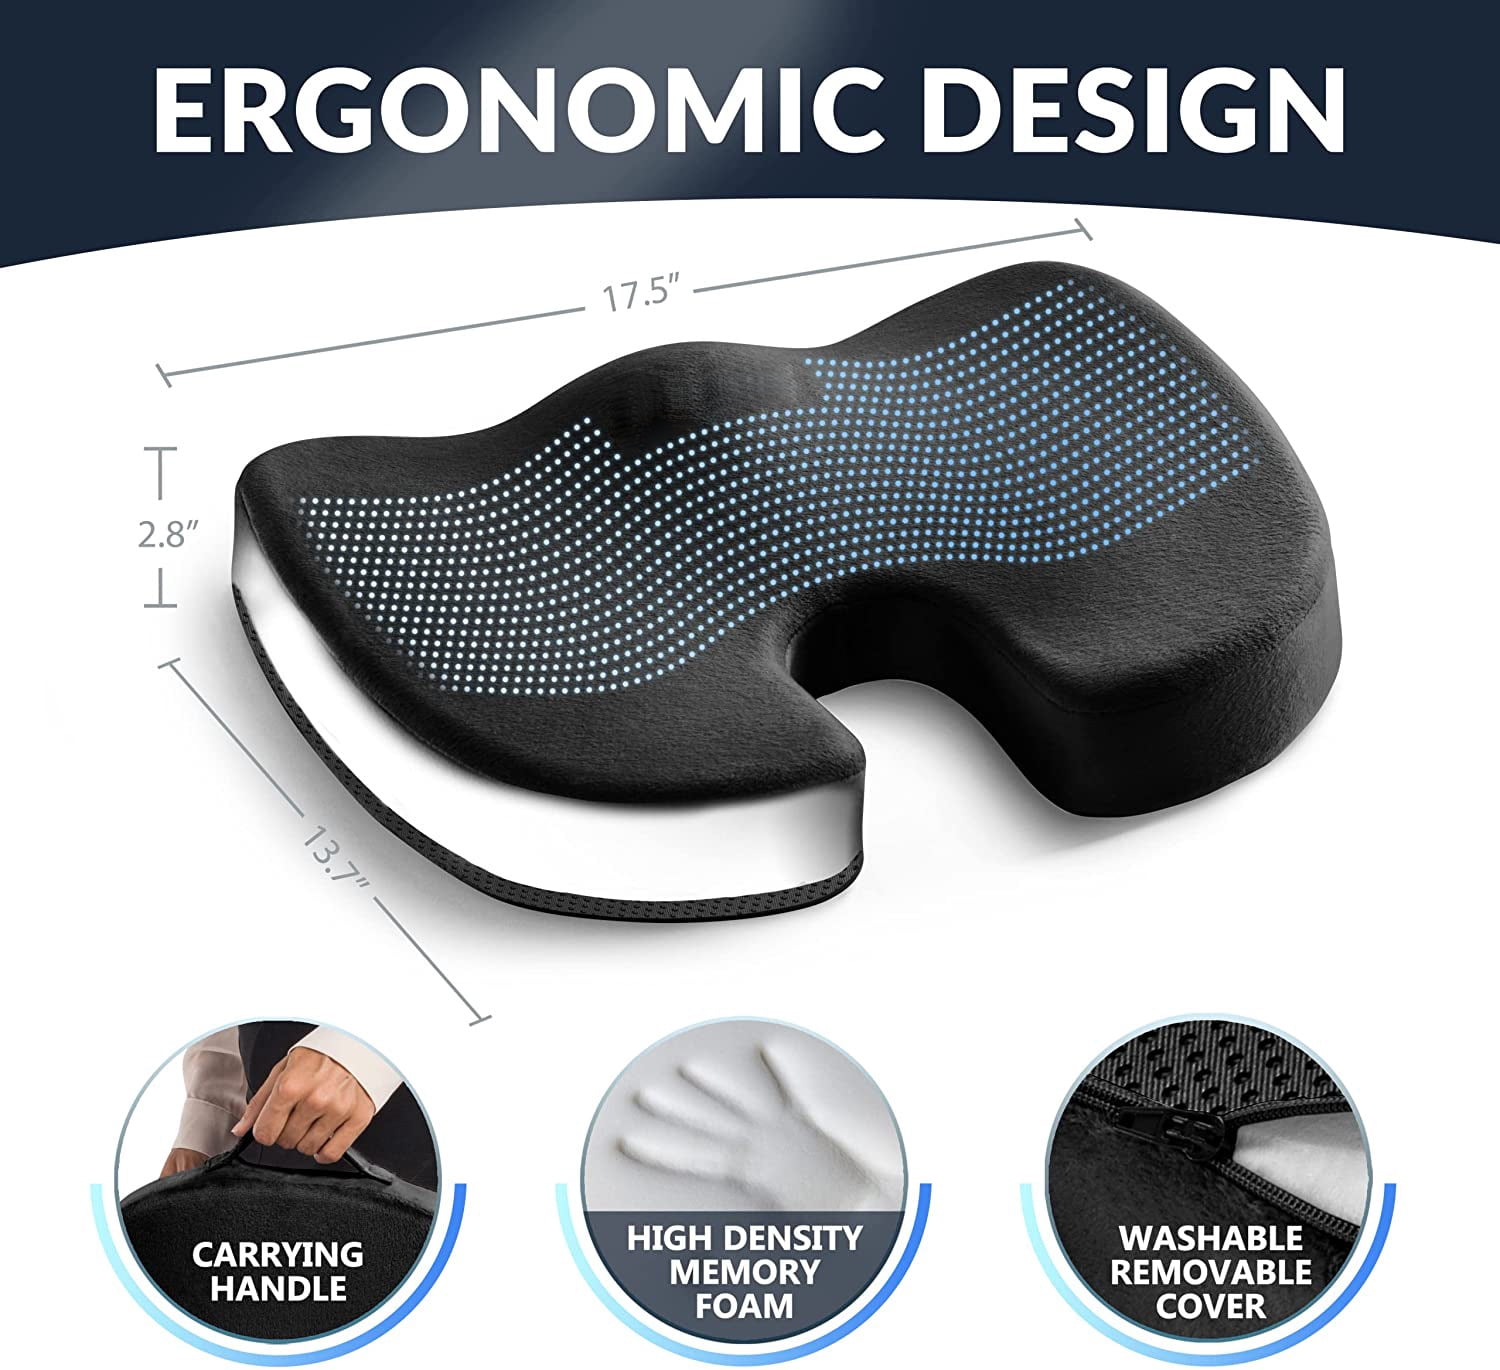 Infused Gel Seat Cushion with Comfort Gel Technology ( CU532715